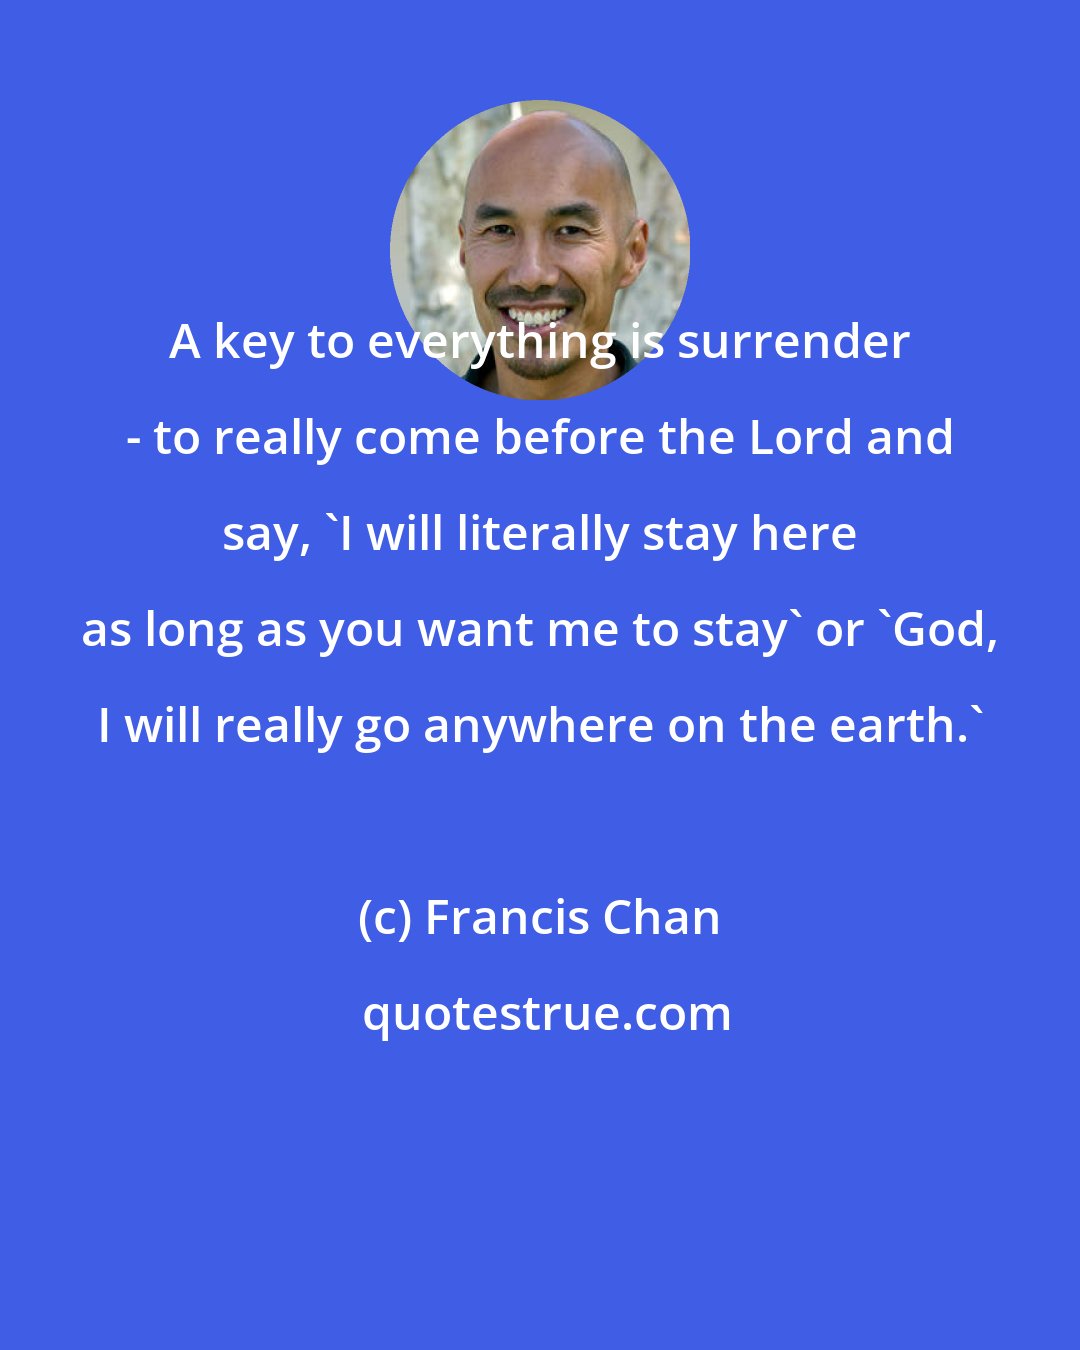 Francis Chan: A key to everything is surrender - to really come before the Lord and say, 'I will literally stay here as long as you want me to stay' or 'God, I will really go anywhere on the earth.'